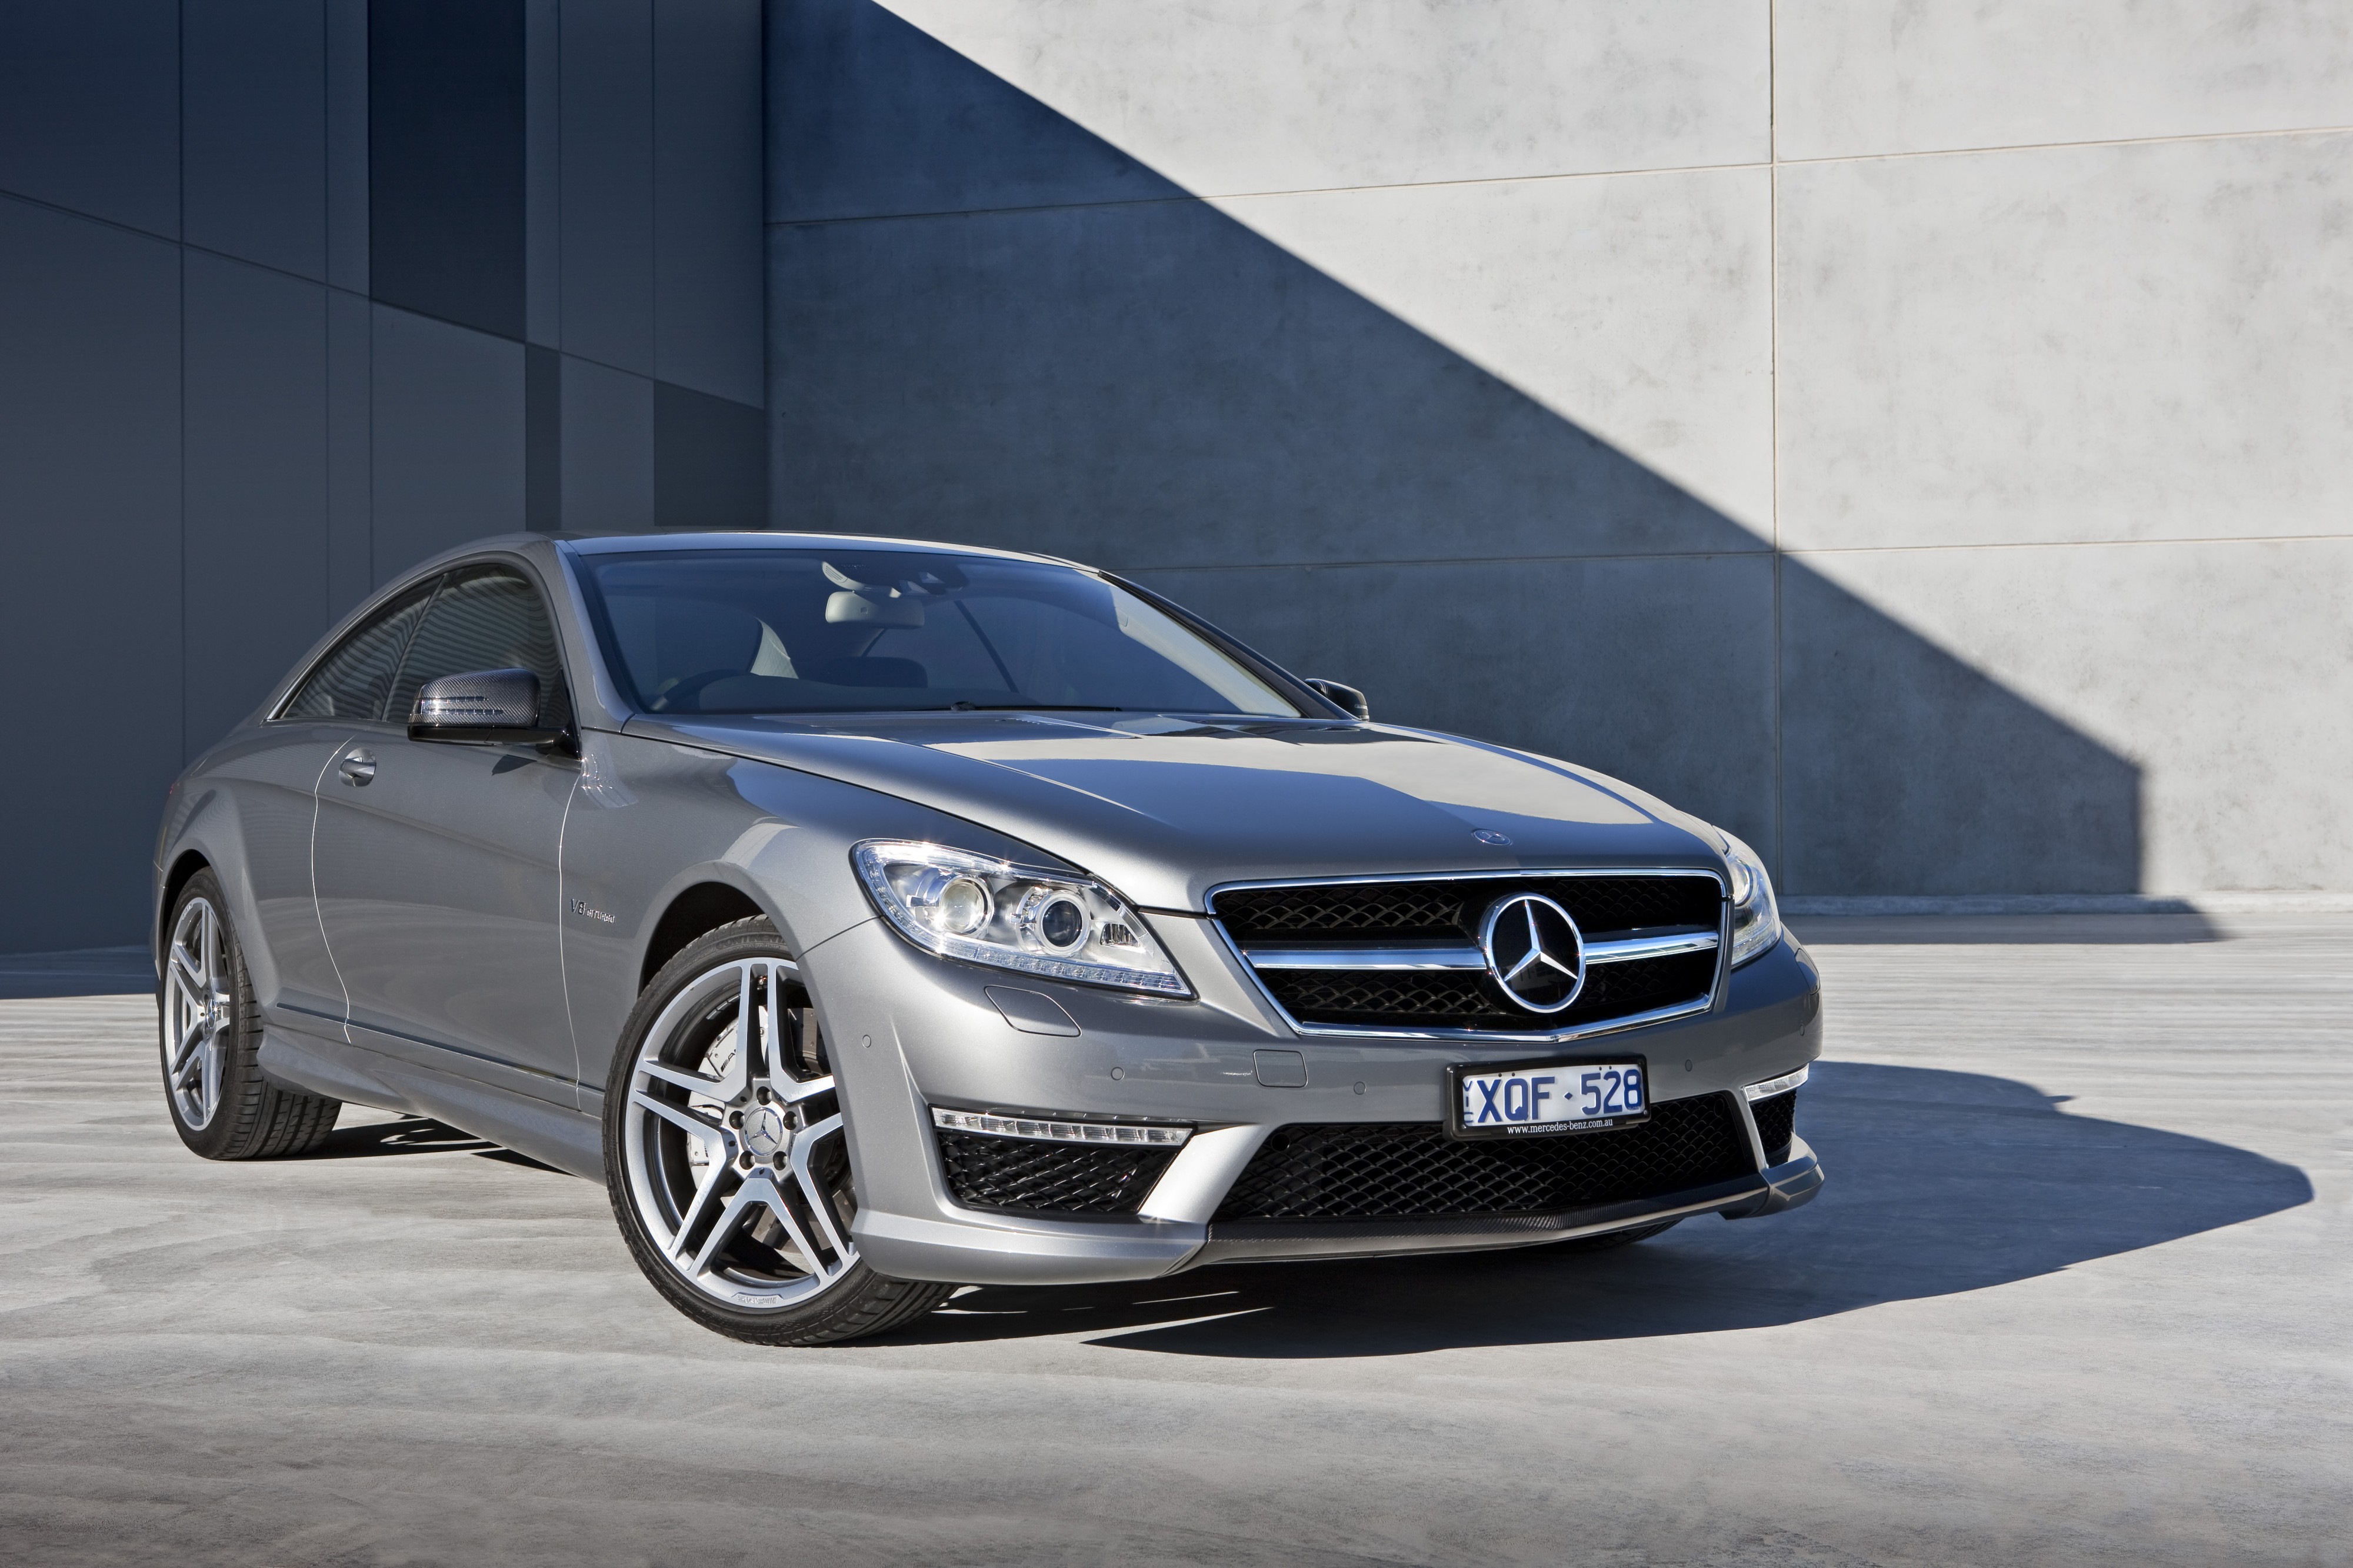 2010 Mercedes-Benz CL 63 AMG (C216) coupe (2010-11-05)